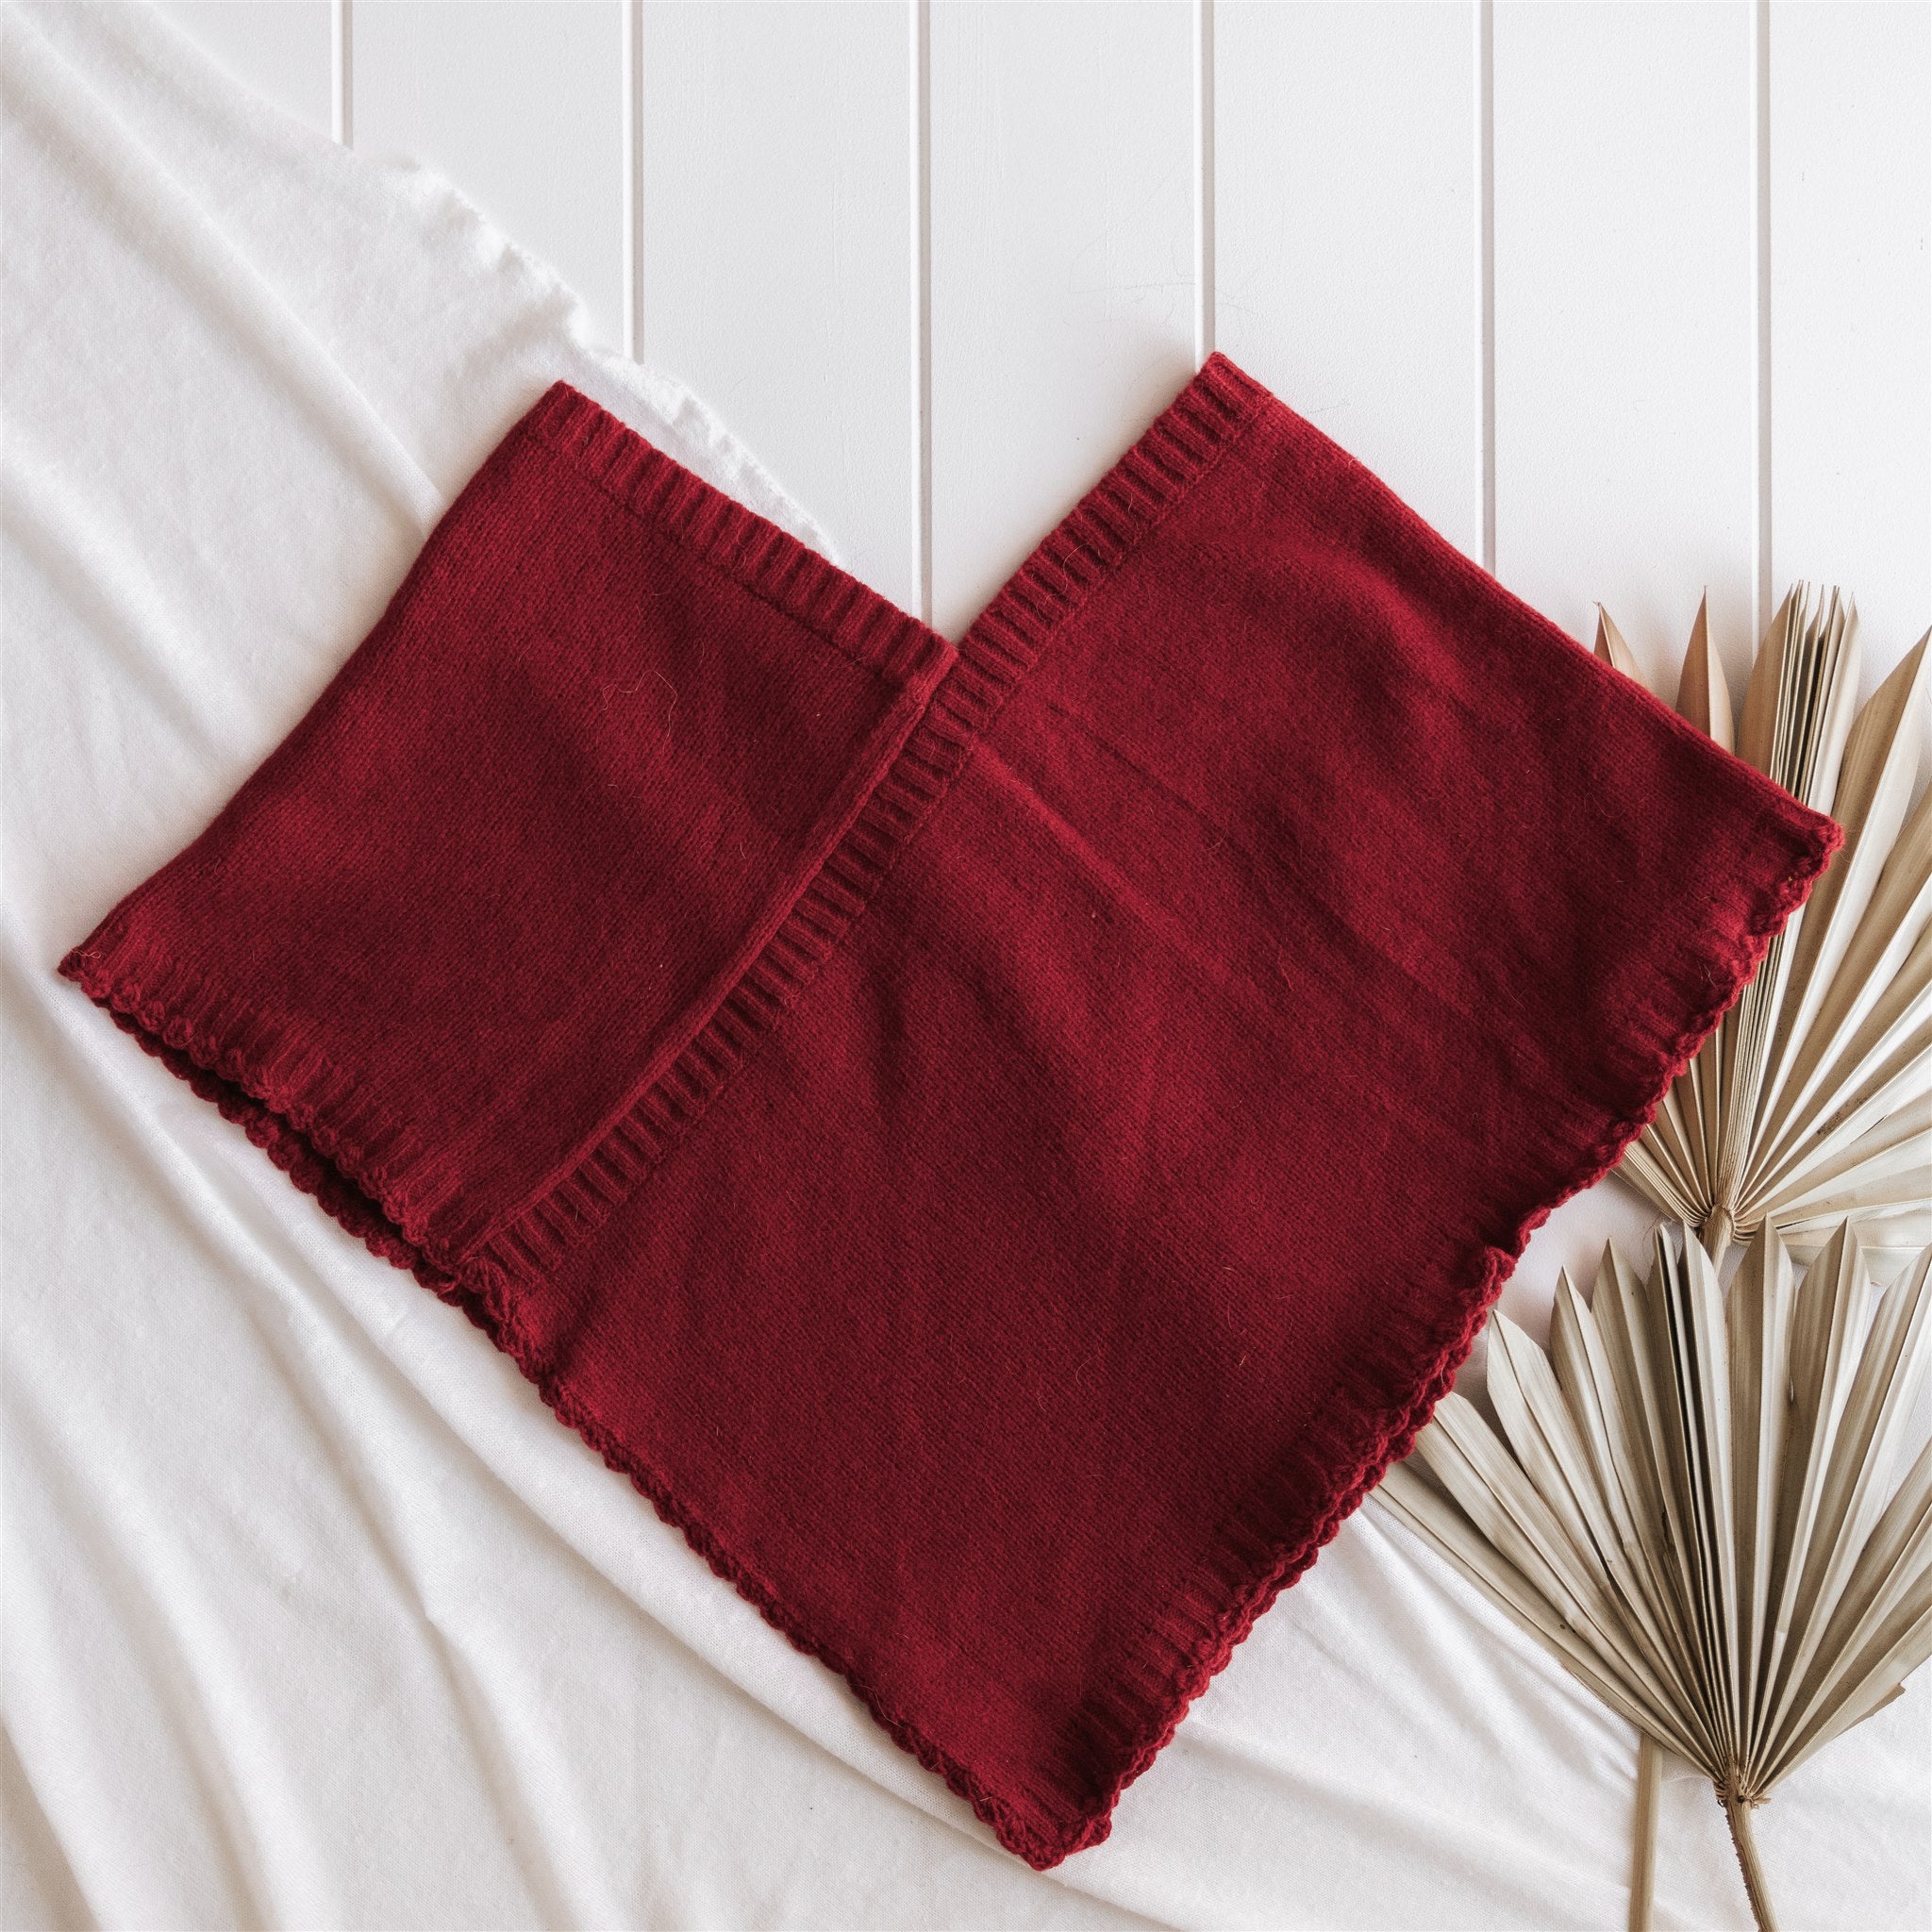 Kids' Poncho Wool / Cashmere Blend - Red - The Fair Trader